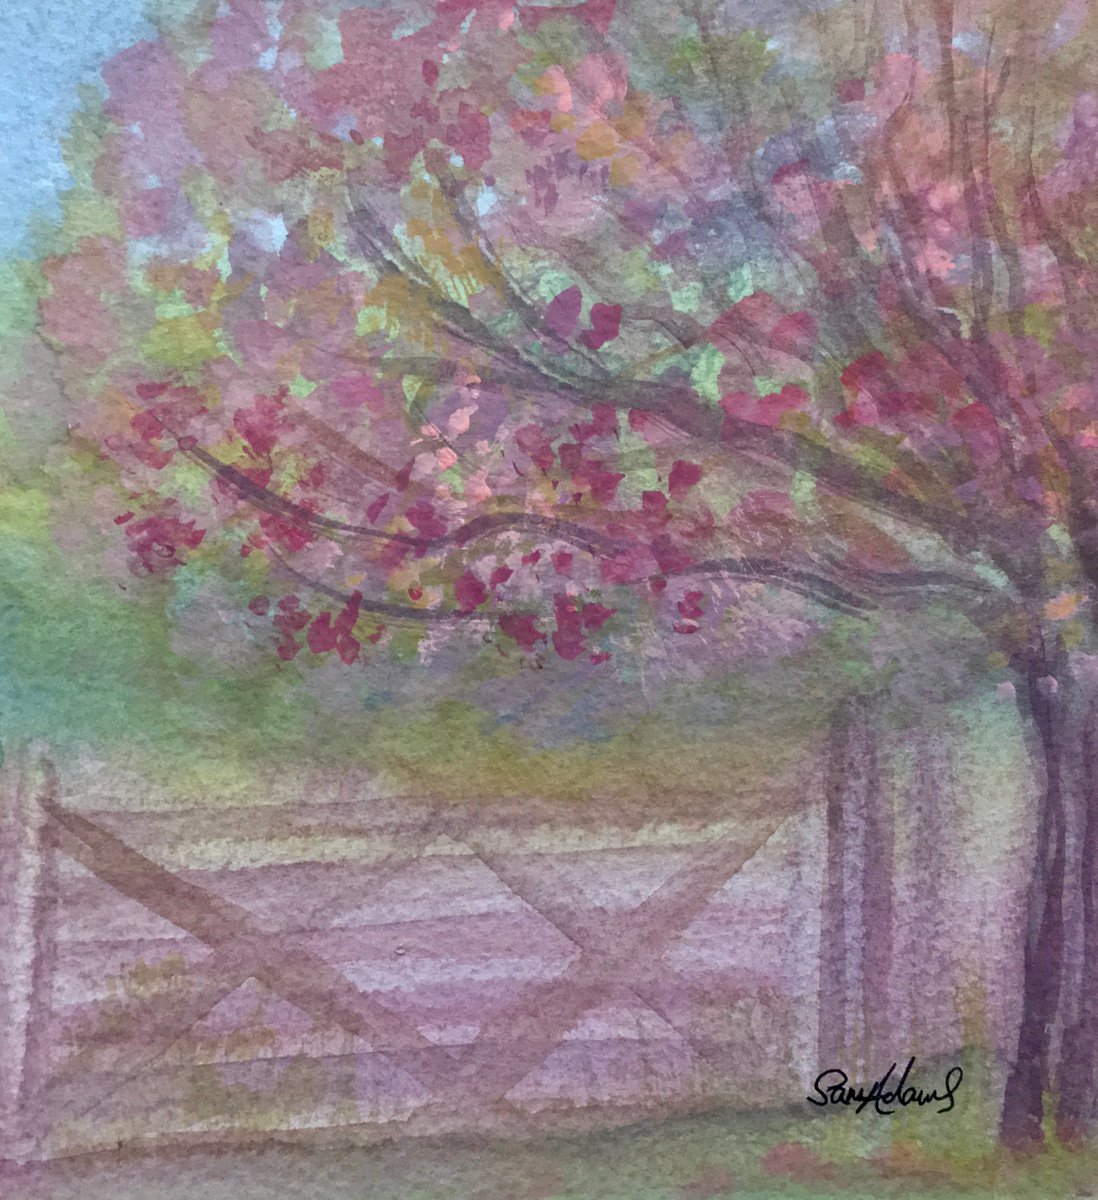 Cherry blossom by the gate by Samantha Adams